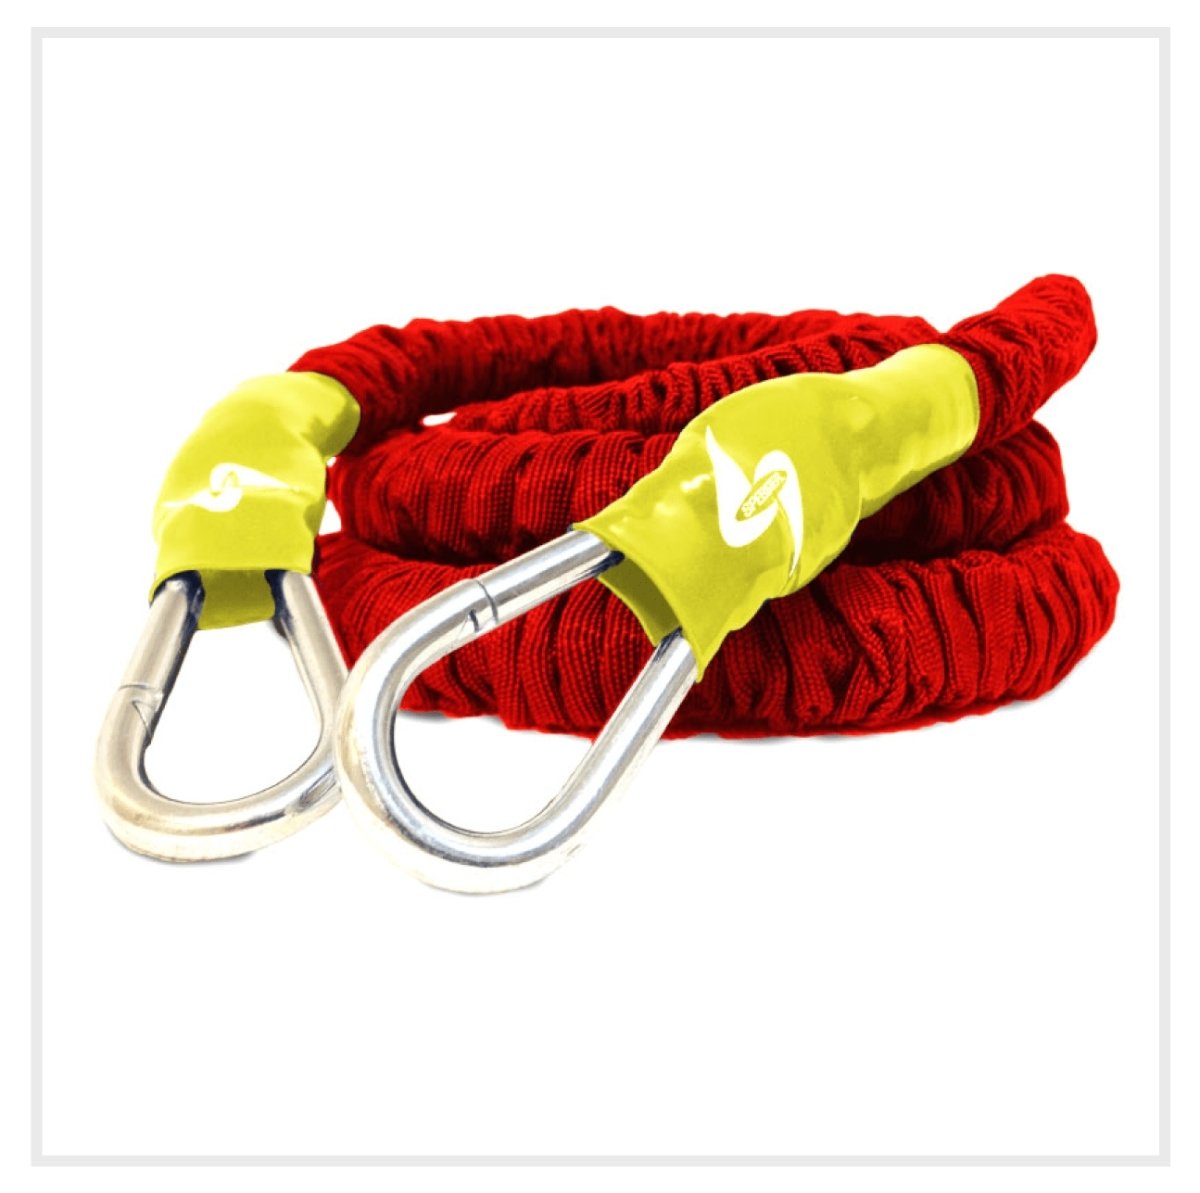 Rocket Bungee- Medium (30ft) best resistance bands made in USA and covered for safety - FitCord Resistance Bands